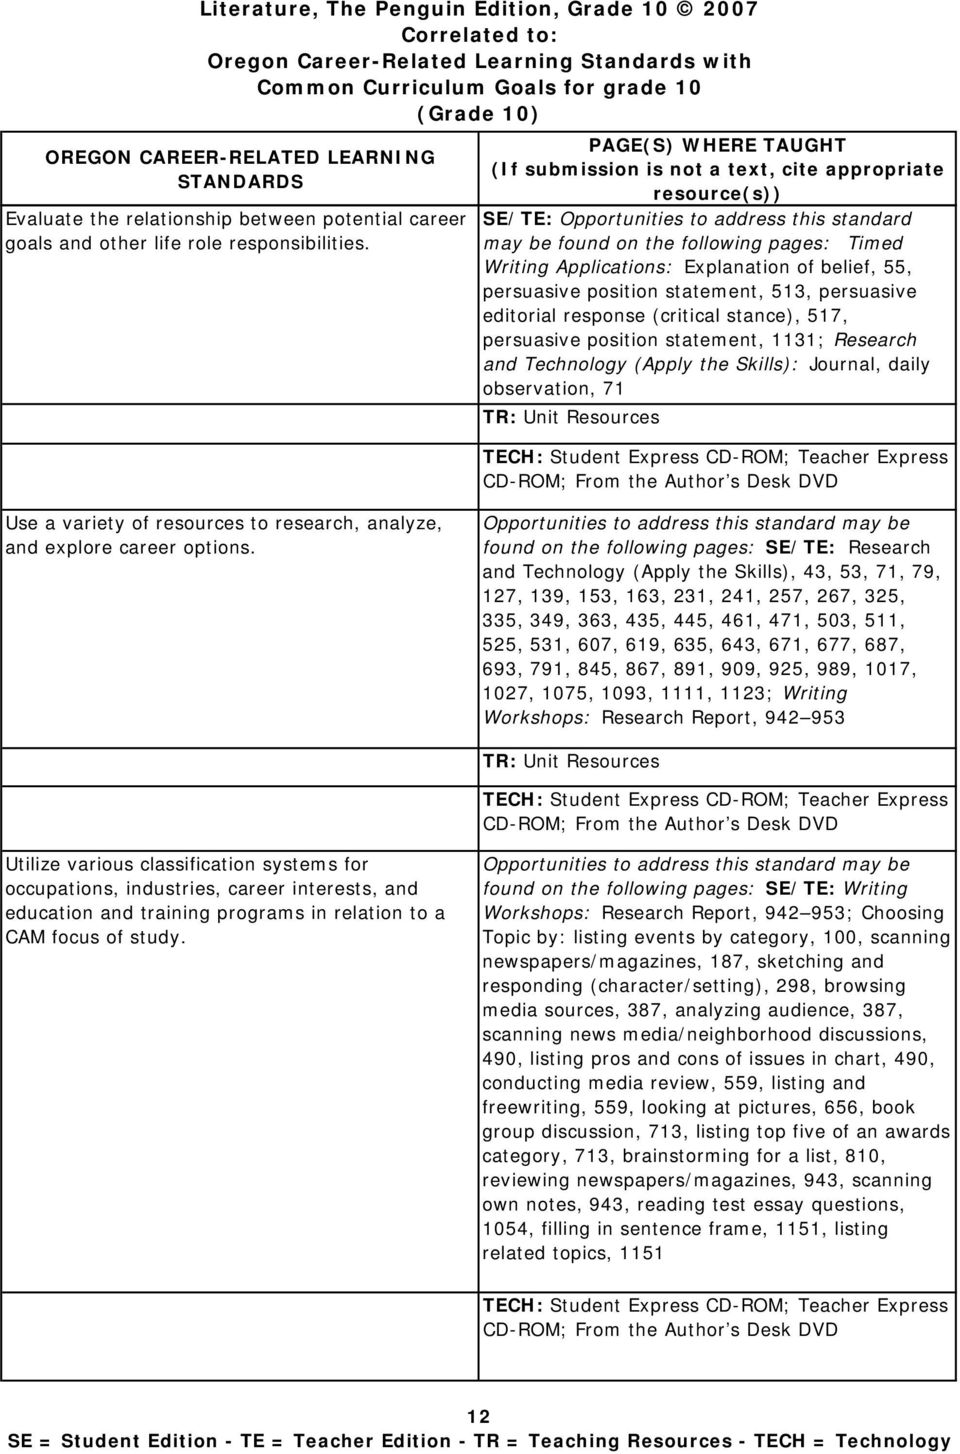 response (critical stance), 517, persuasive position statement, 1131; Research and Technology (Apply the Skills): Journal, daily observation, 71 Use a variety of resources to research, analyze, and